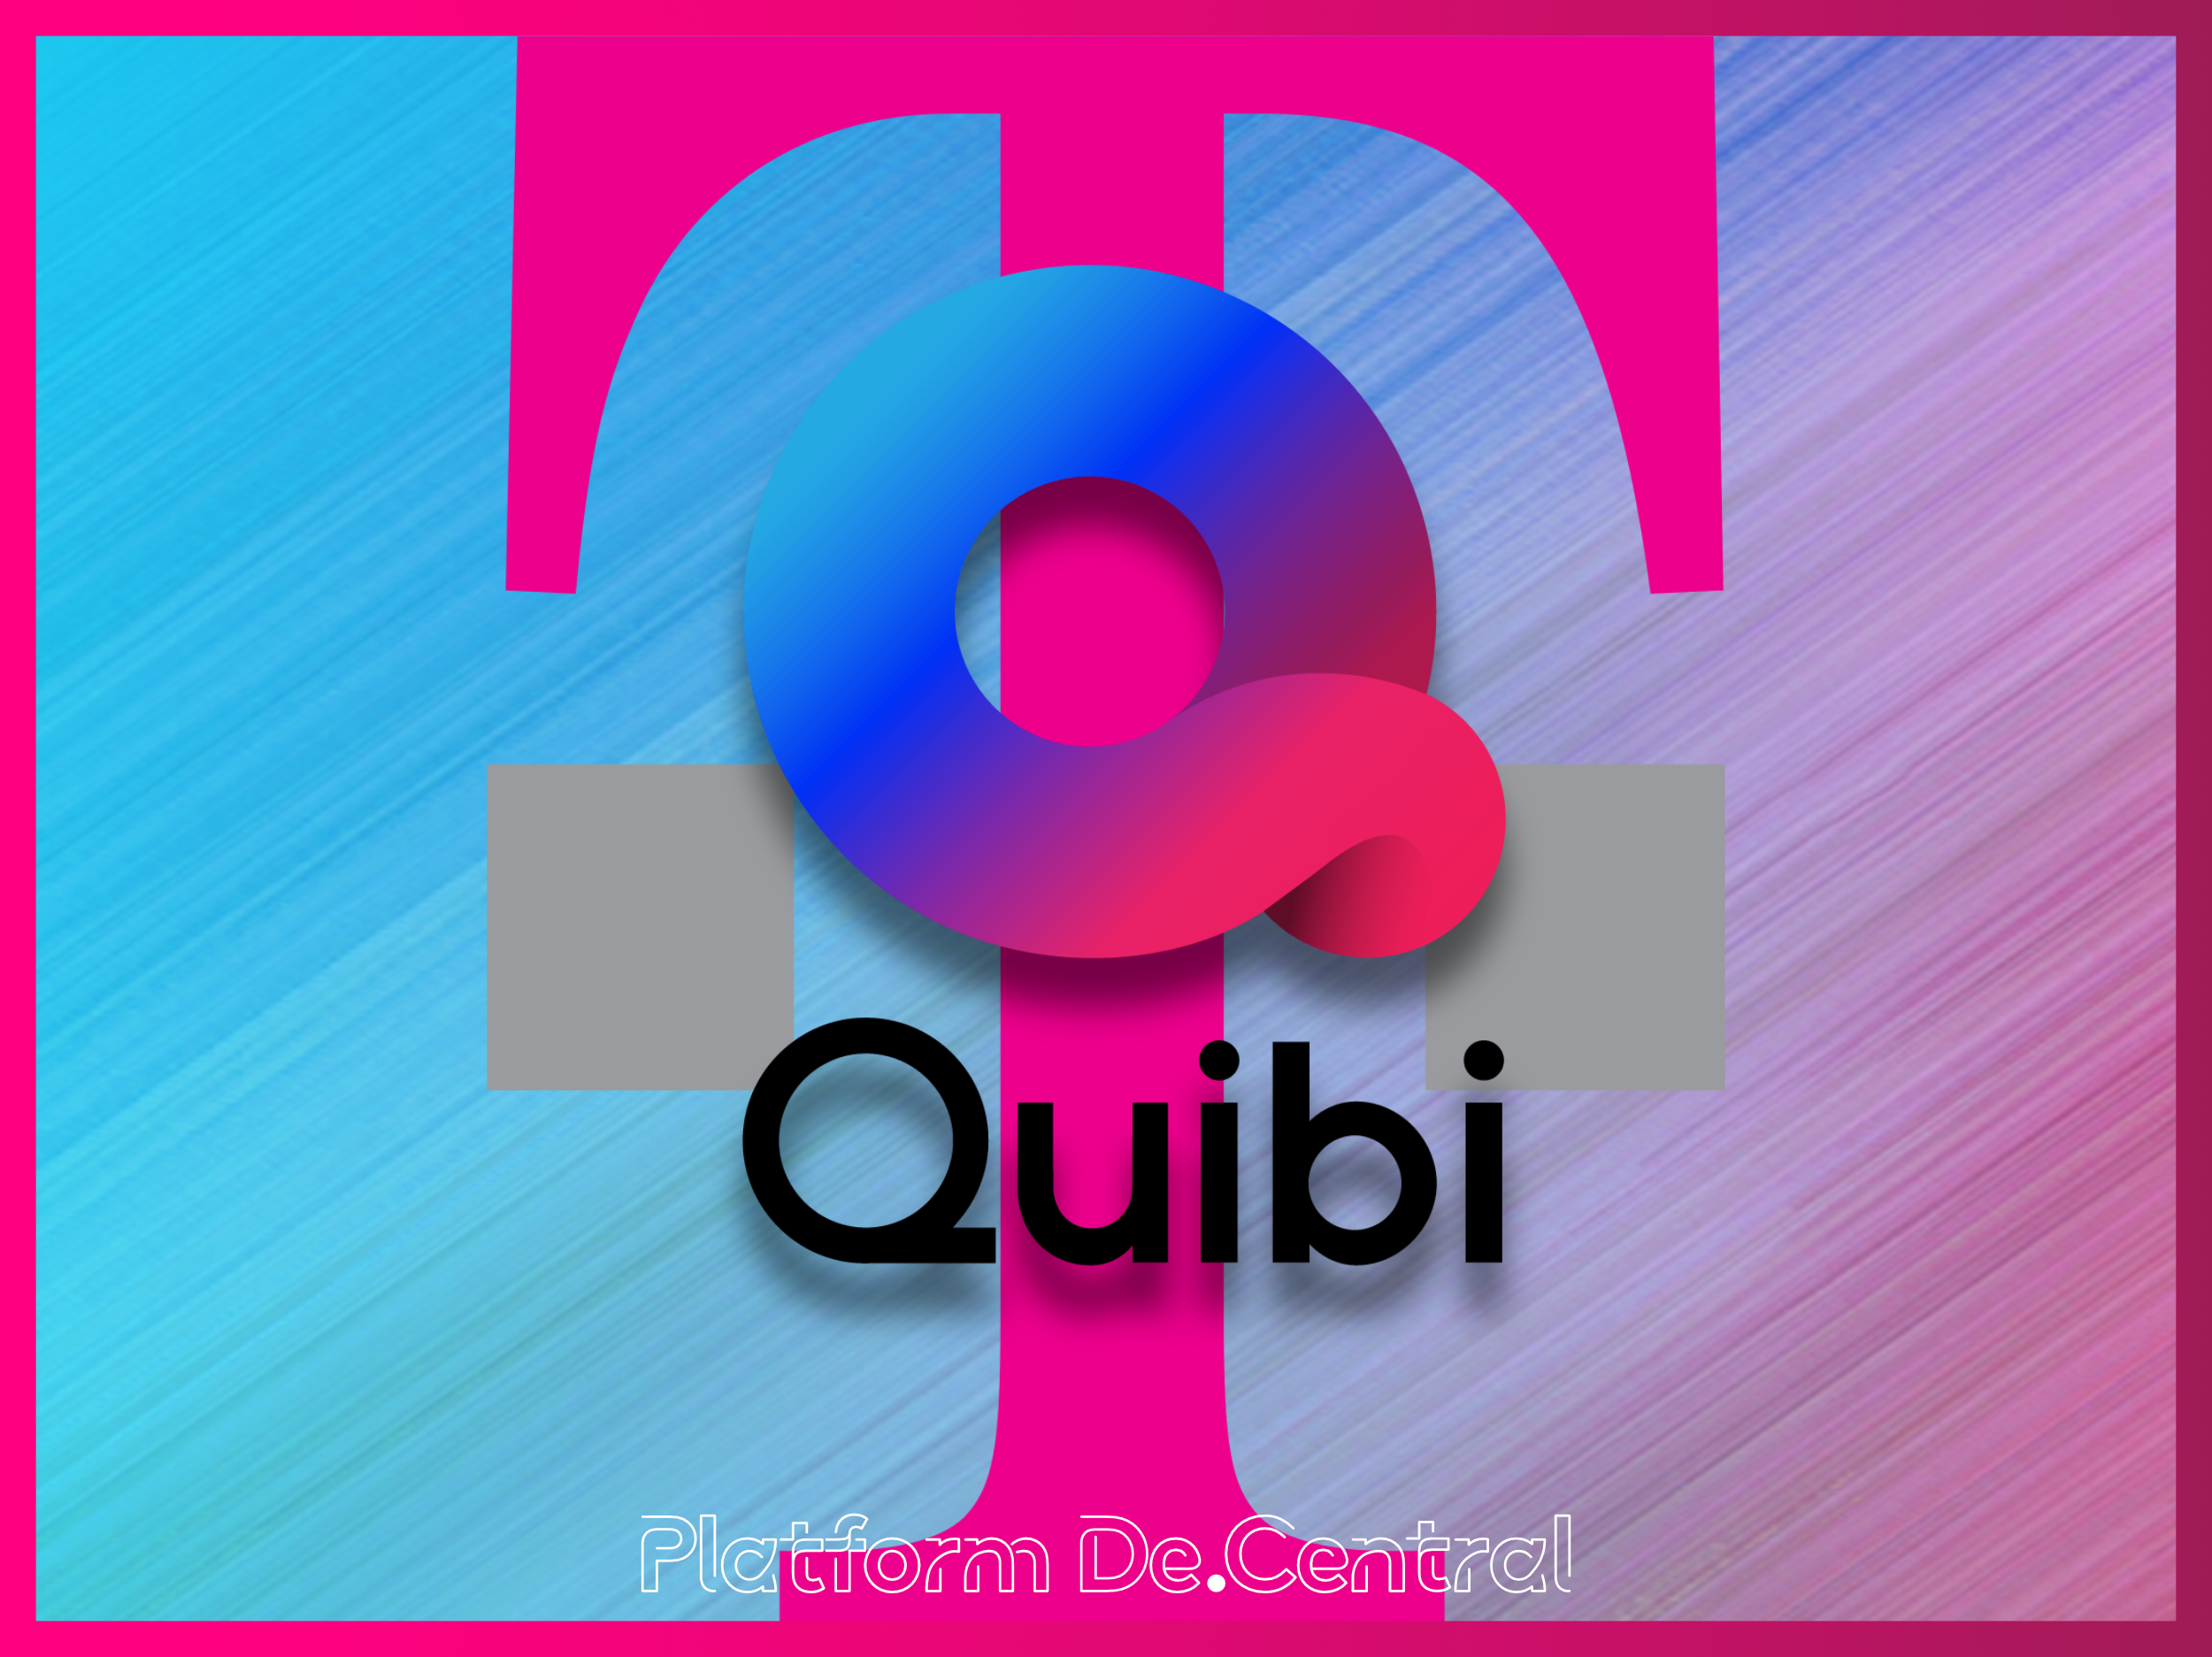 T-Mobile is offering its subscribers 1 year of Quibi